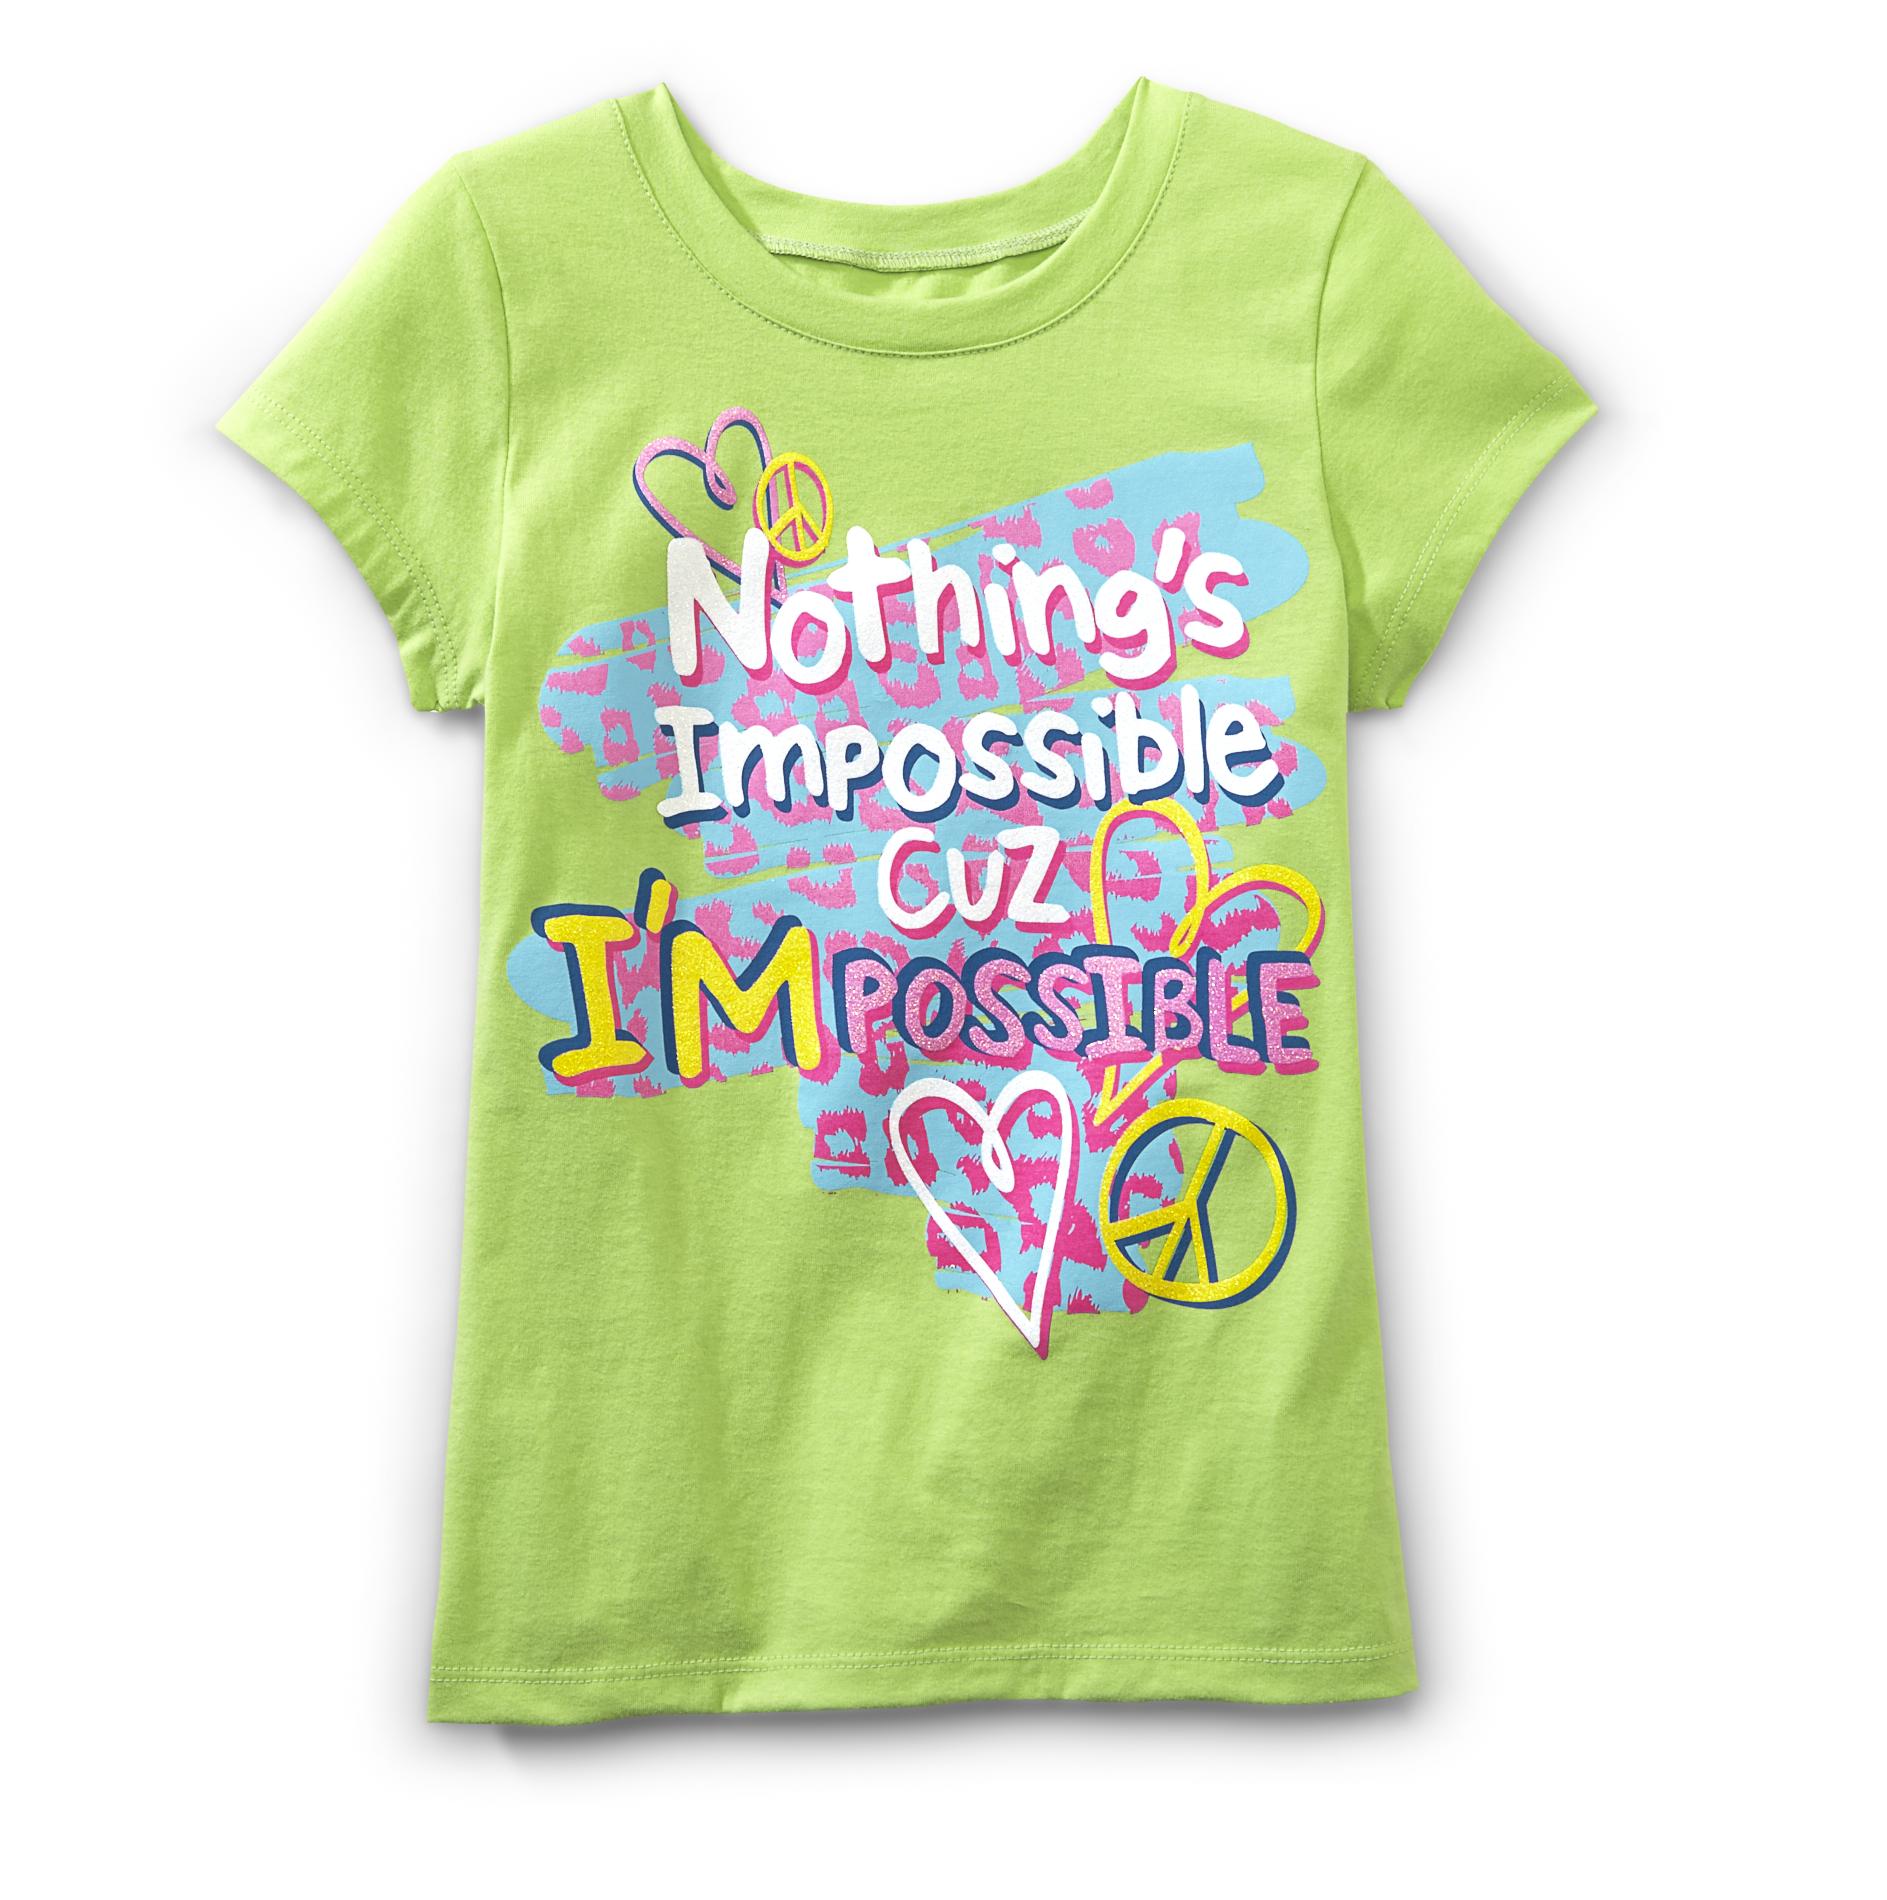 Route 66 Girl's Graphic T-Shirt - Nothing's Impossible